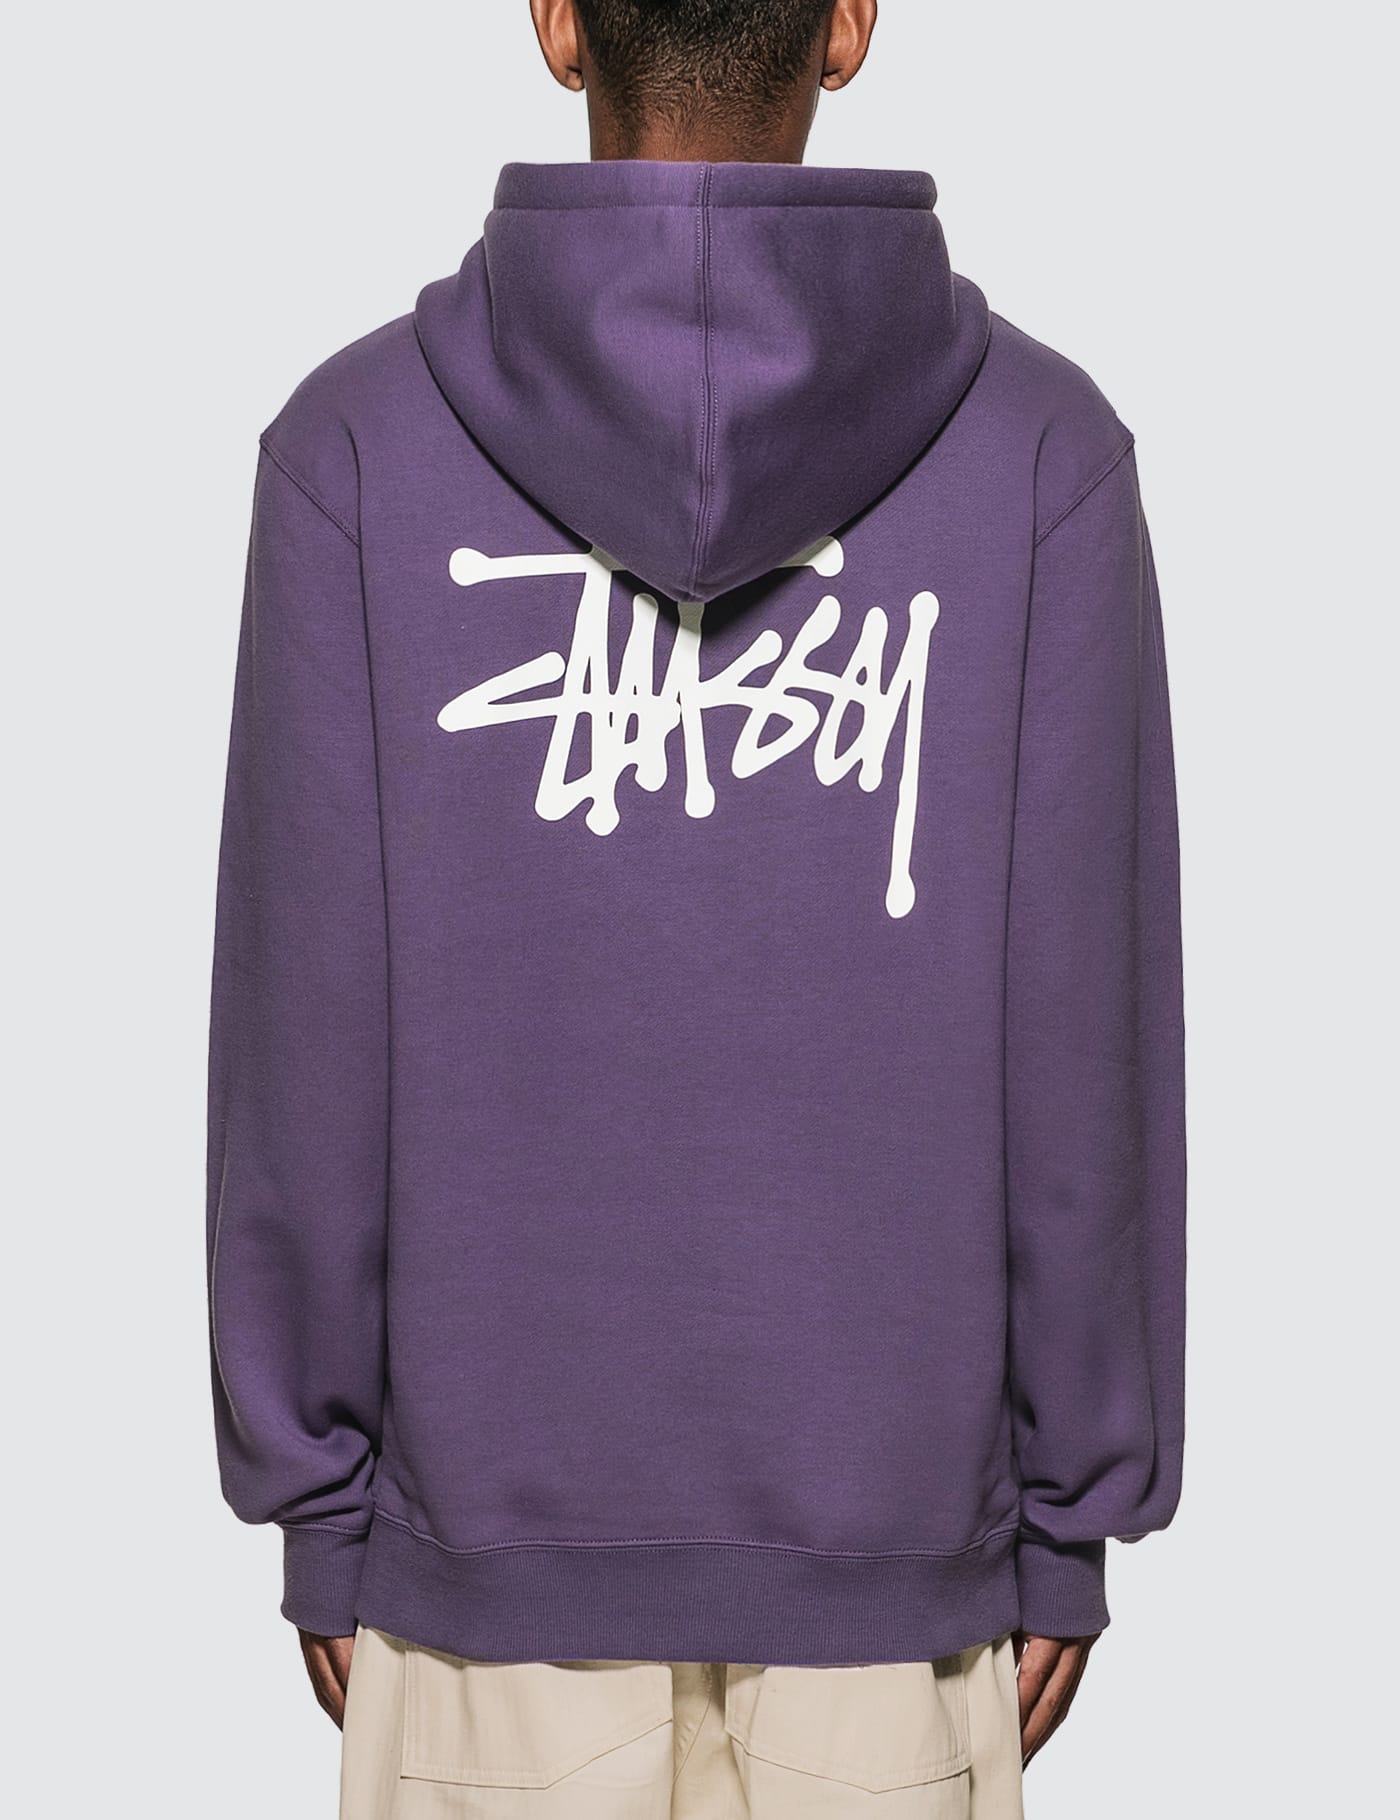 Stüssy - Basic Stussy Hoodie | HBX - Globally Curated Fashion and 